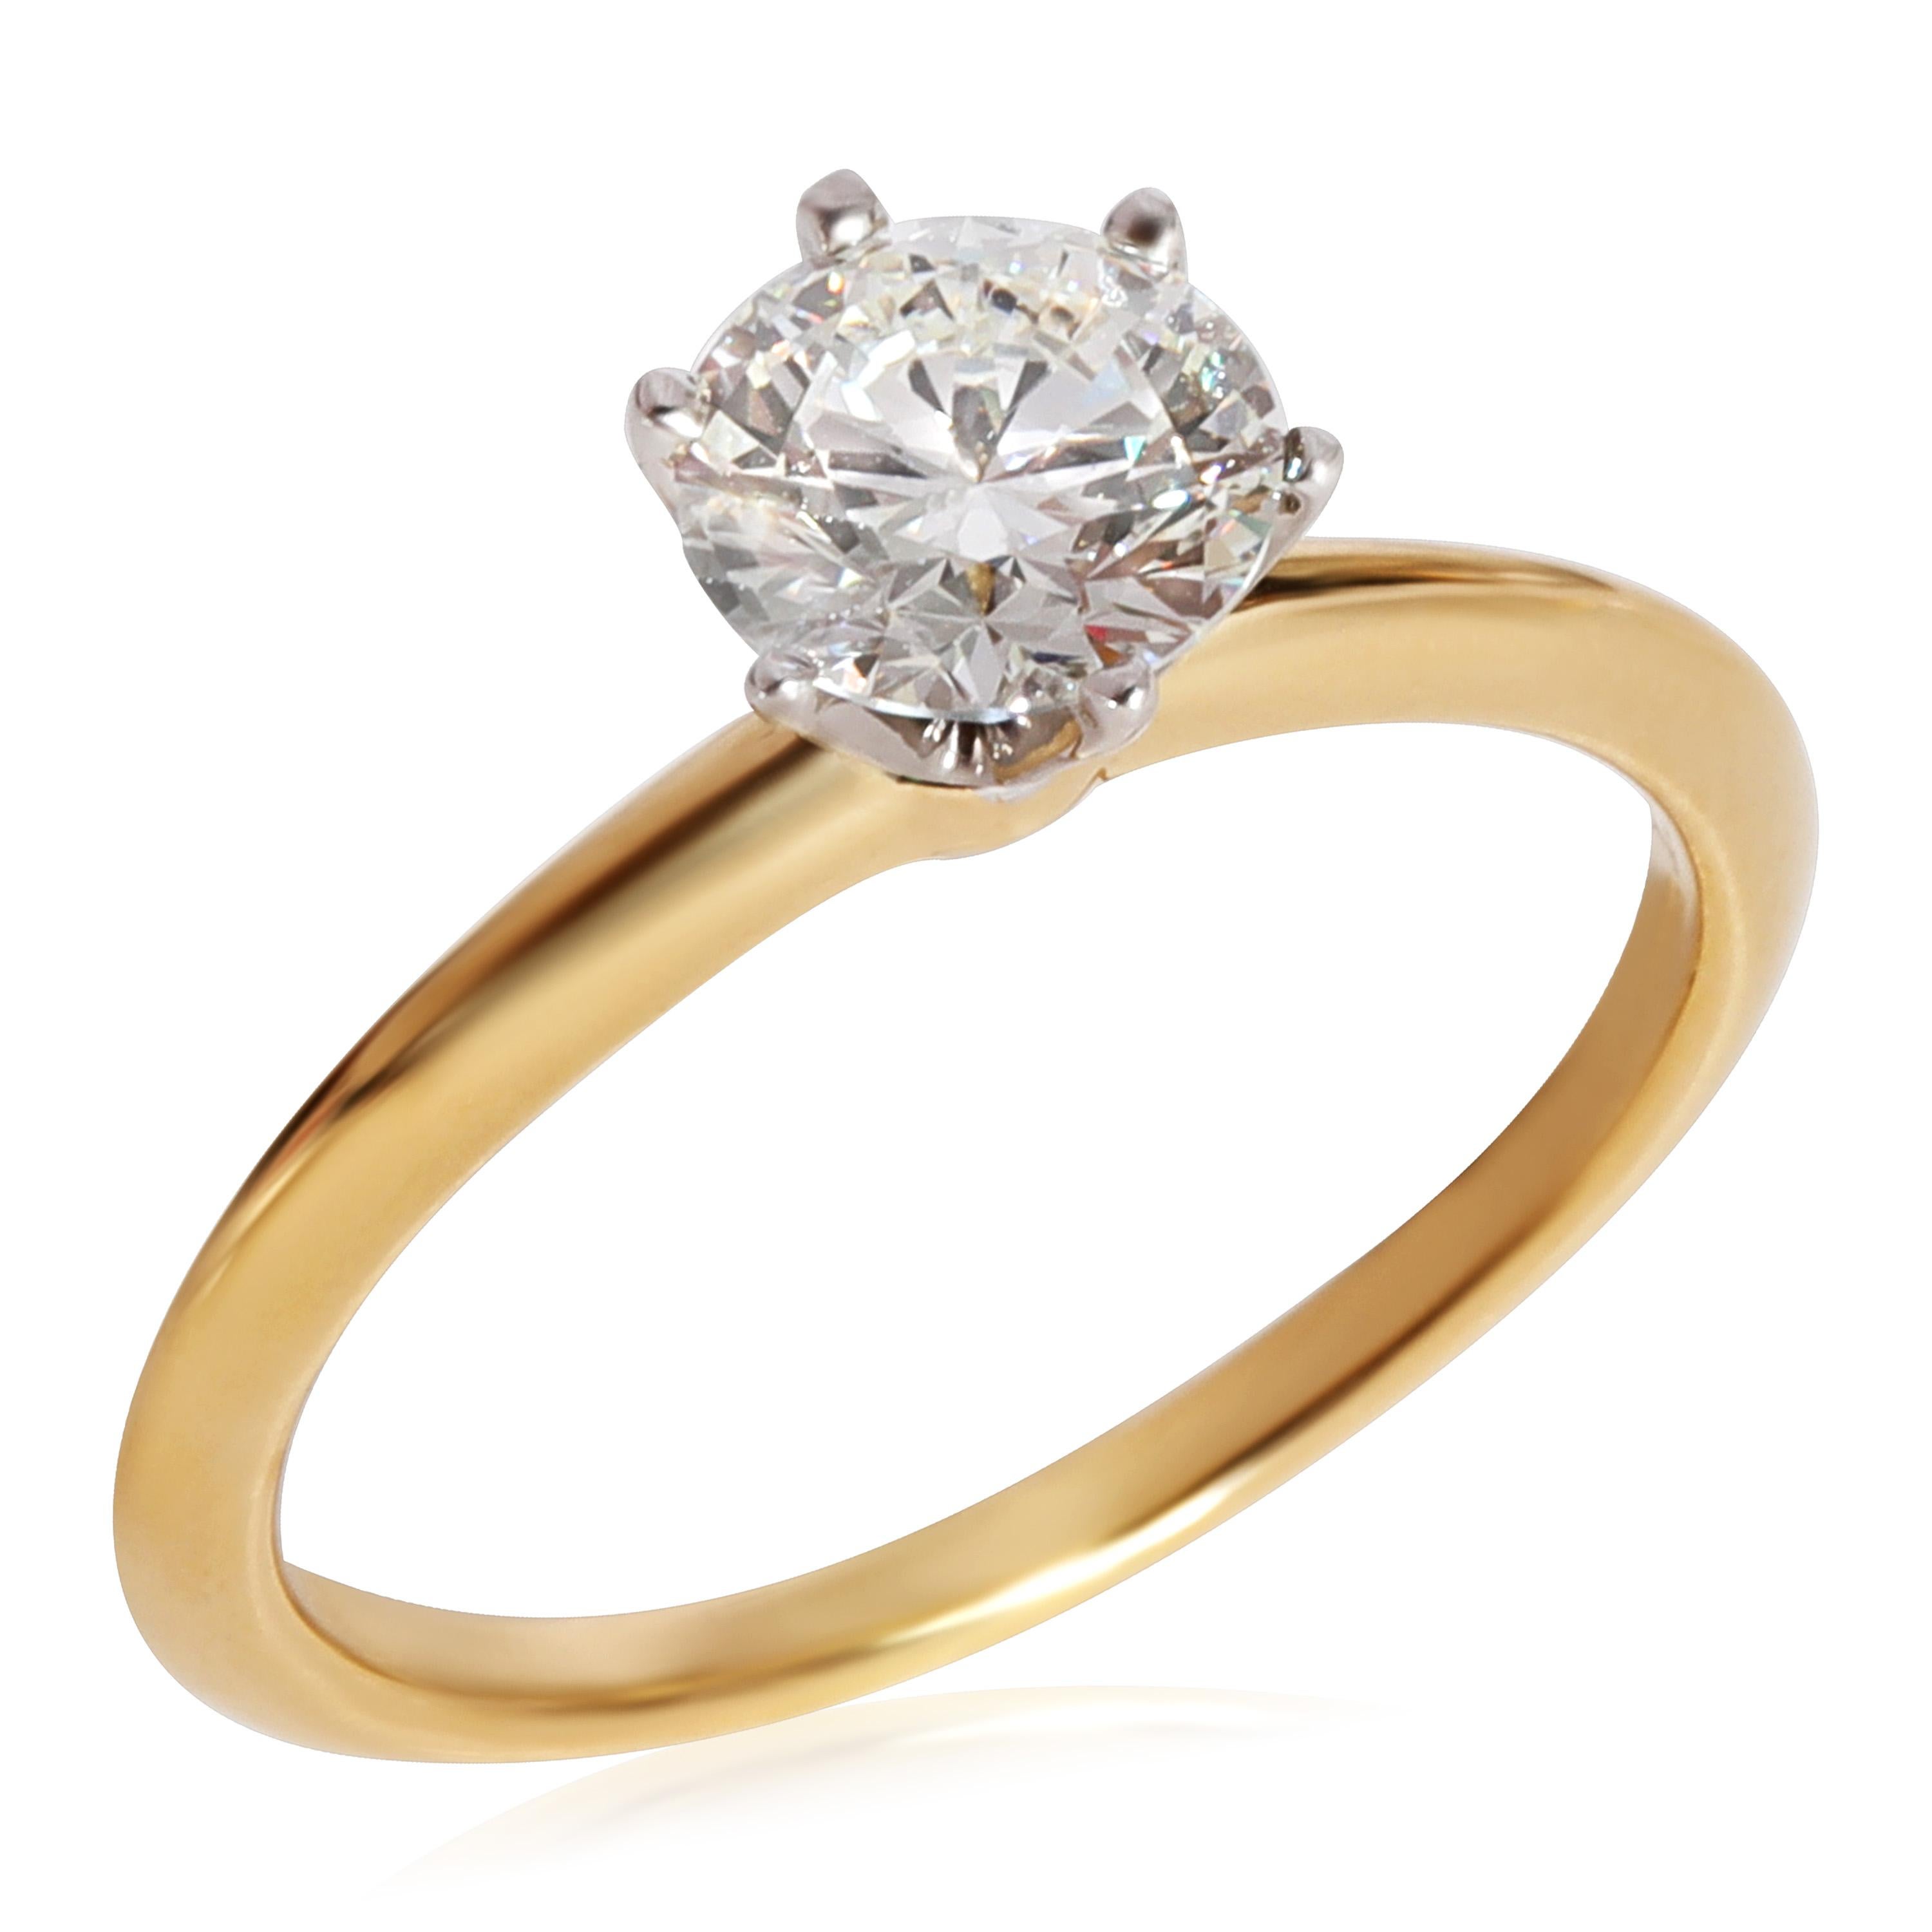 Tiffany & Co. The Tiffany Solitaire Ring in 18K Yellow Gold/Plat 1.05 CTW

PRIMARY DETAILS
SKU: 123431
Listing Title: Tiffany & Co. The Tiffany Solitaire Ring in 18K Yellow Gold/Plat 1.05 CTW
Condition Description: Retails for 15000 USD. In